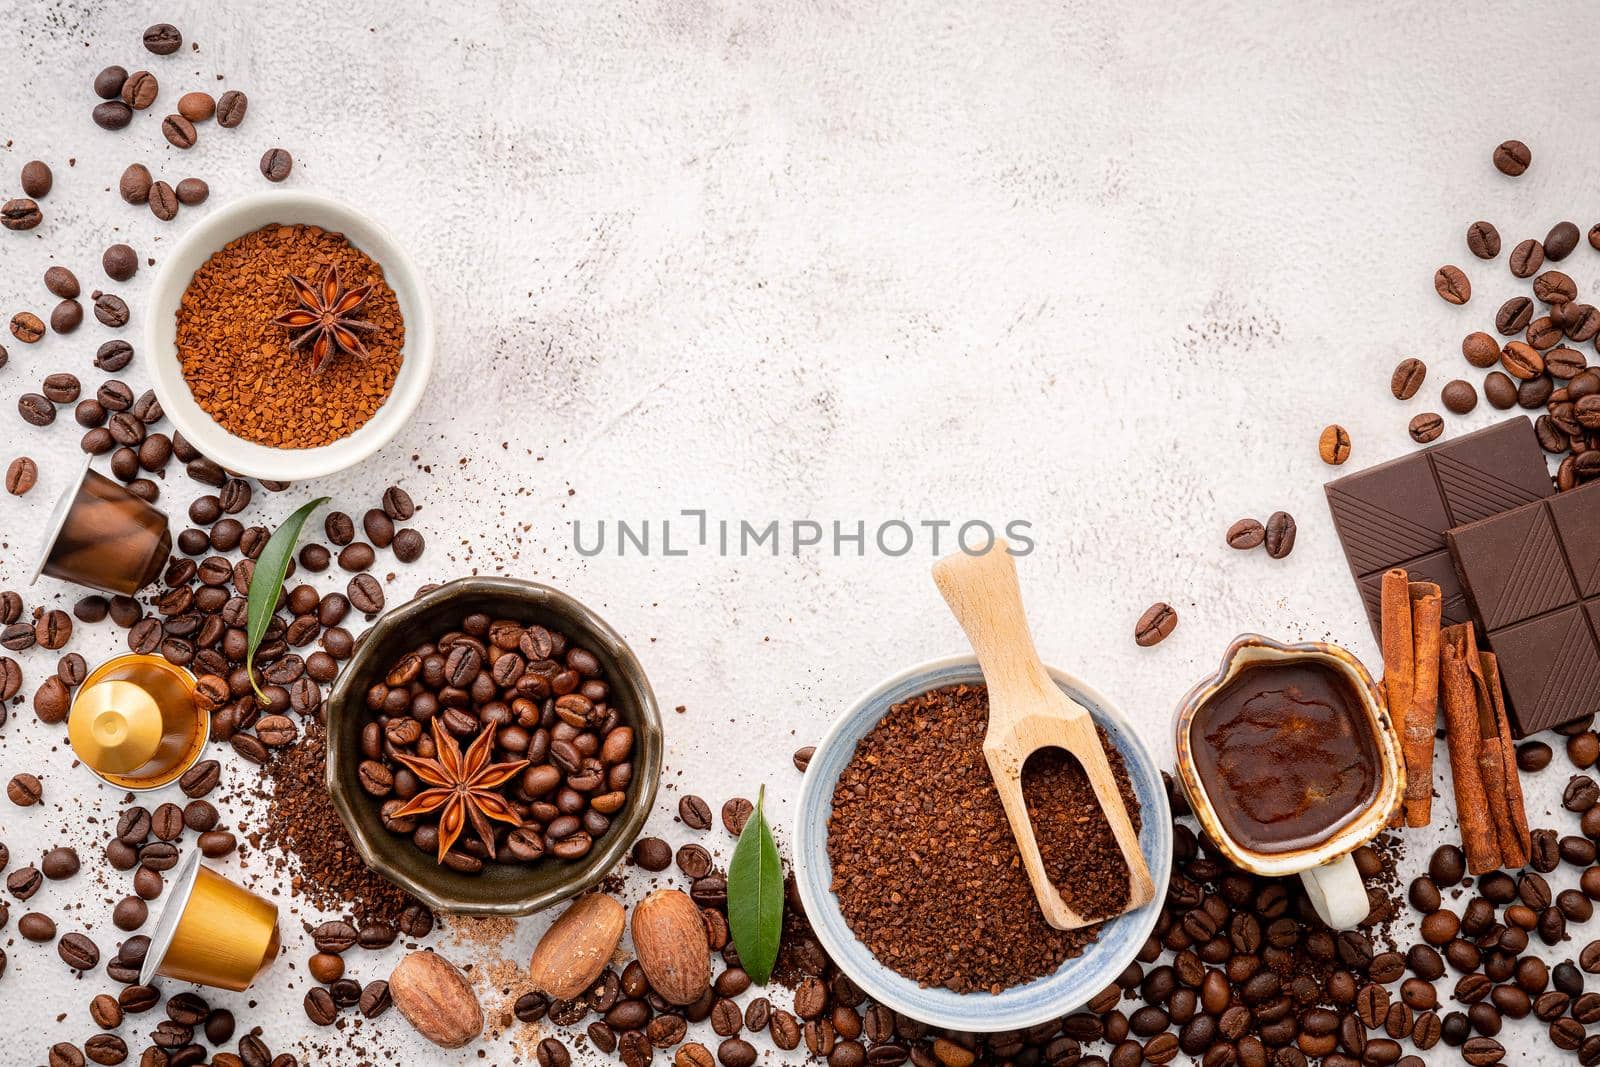 Background of various coffee , dark roasted coffee beans , ground and capsules with scoops setup on white concrete background with copy space.